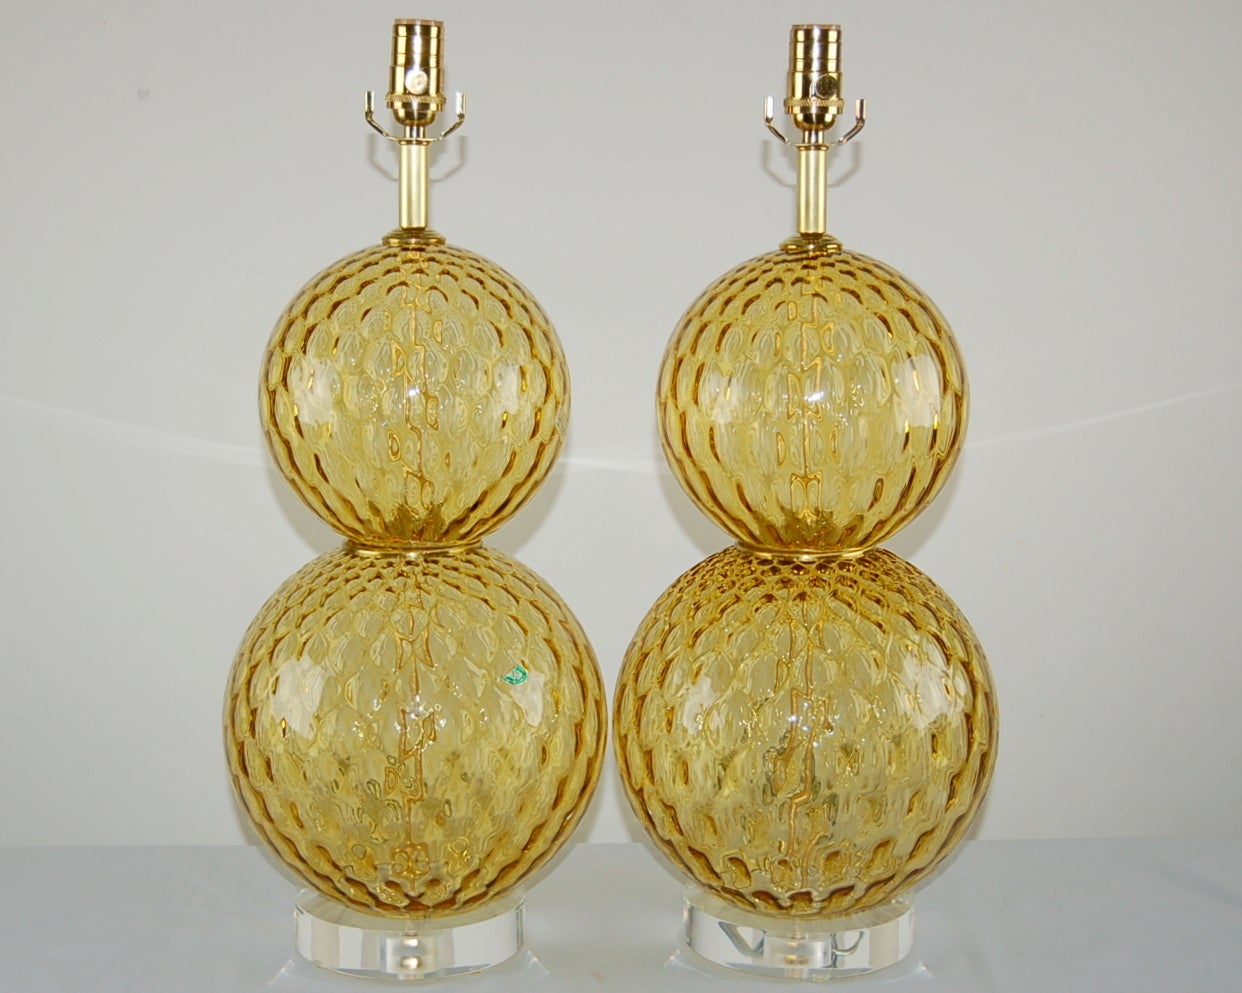 Stacked ball lamps of HARVEST GOLD, with brass wafers at the waist. Great texture to the glass provide a magical look, courtesy of the netted optics. 

The lamps measure 23 inches from tabletop to socket top. As shown, the top of shade is 28